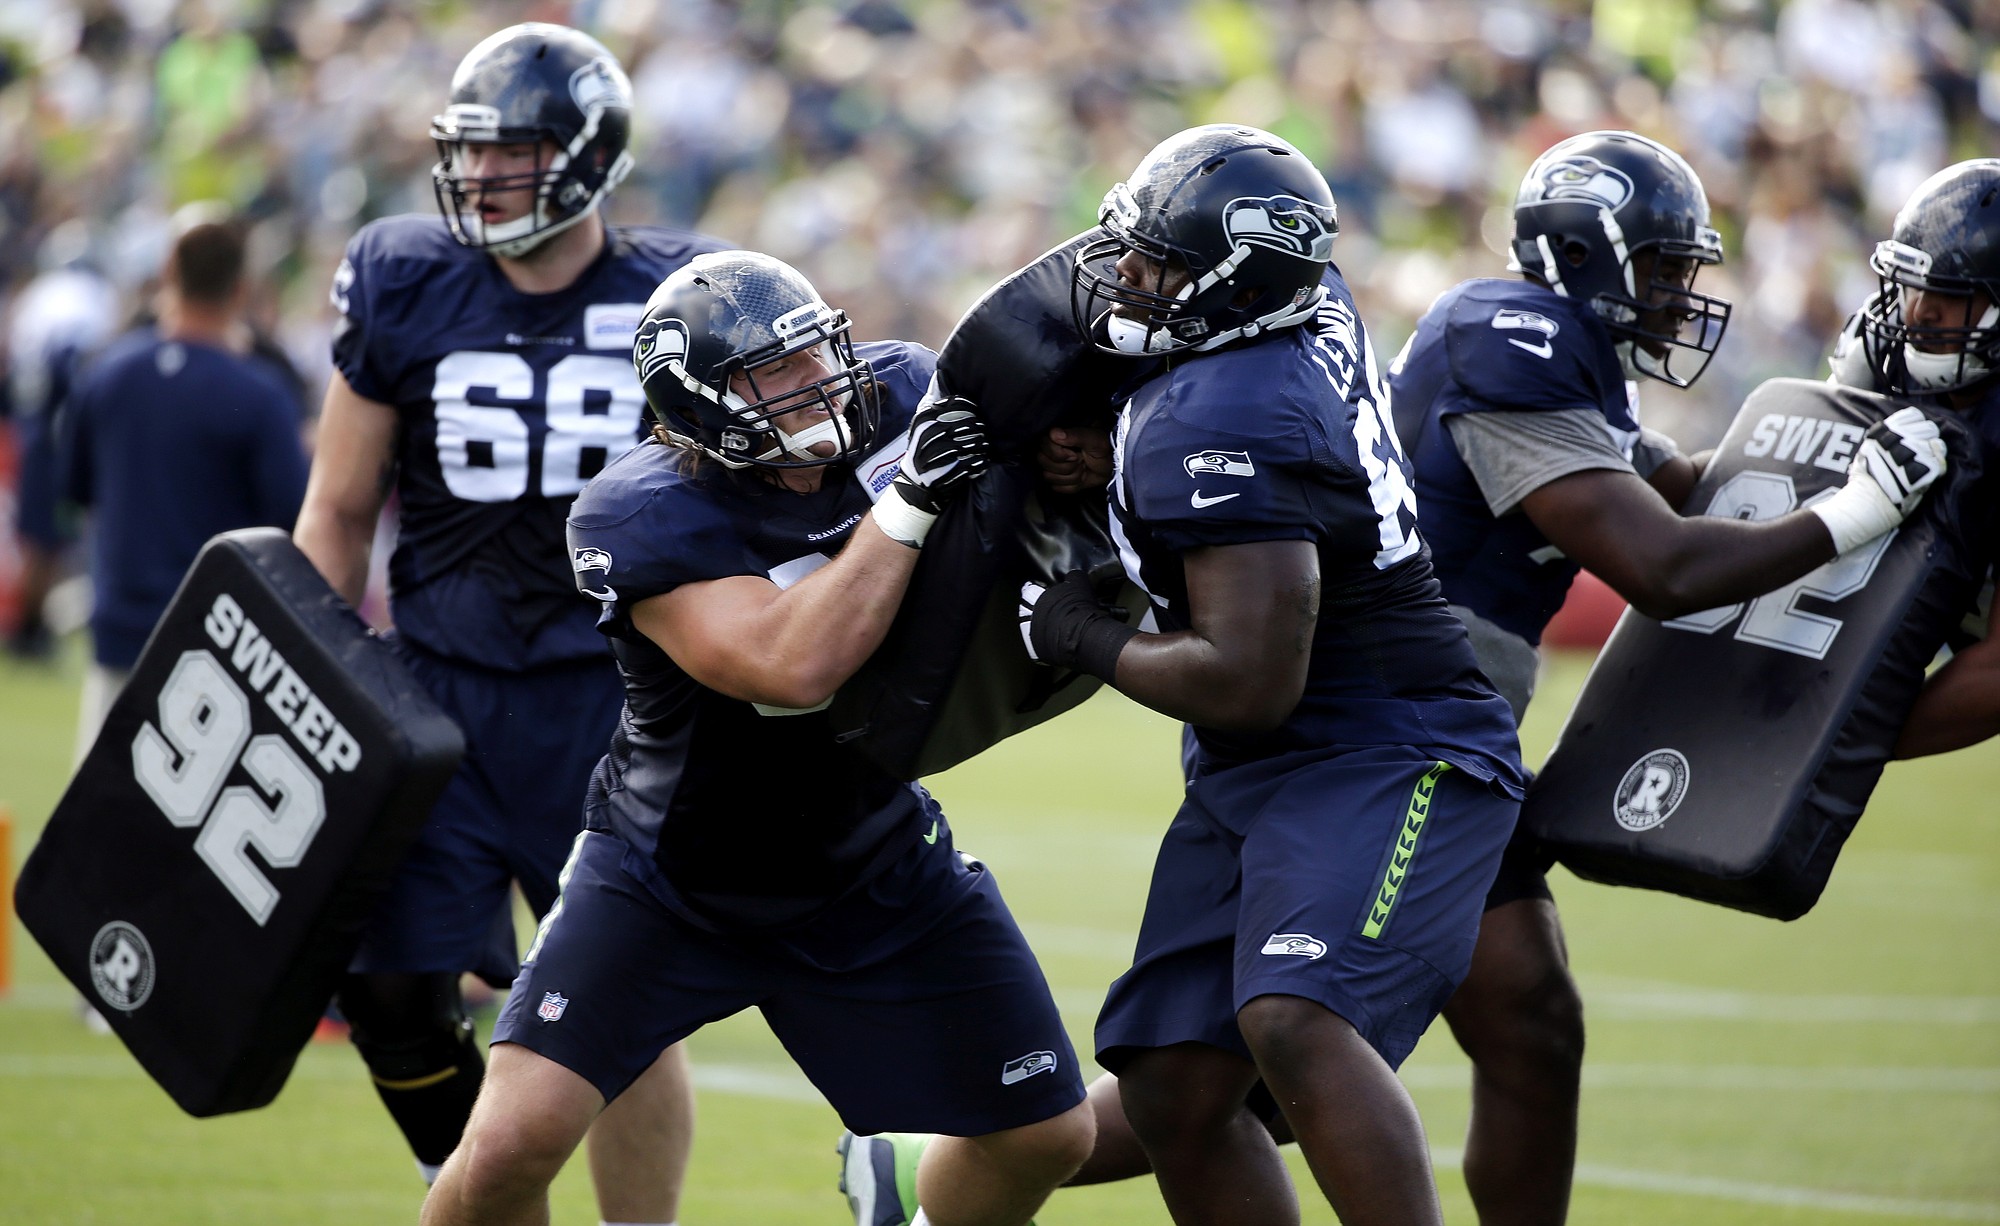 Seattle Seahawks Kristjan Sokoli, second left, and Patrick Lewis push against each other in a drill at a training camp.